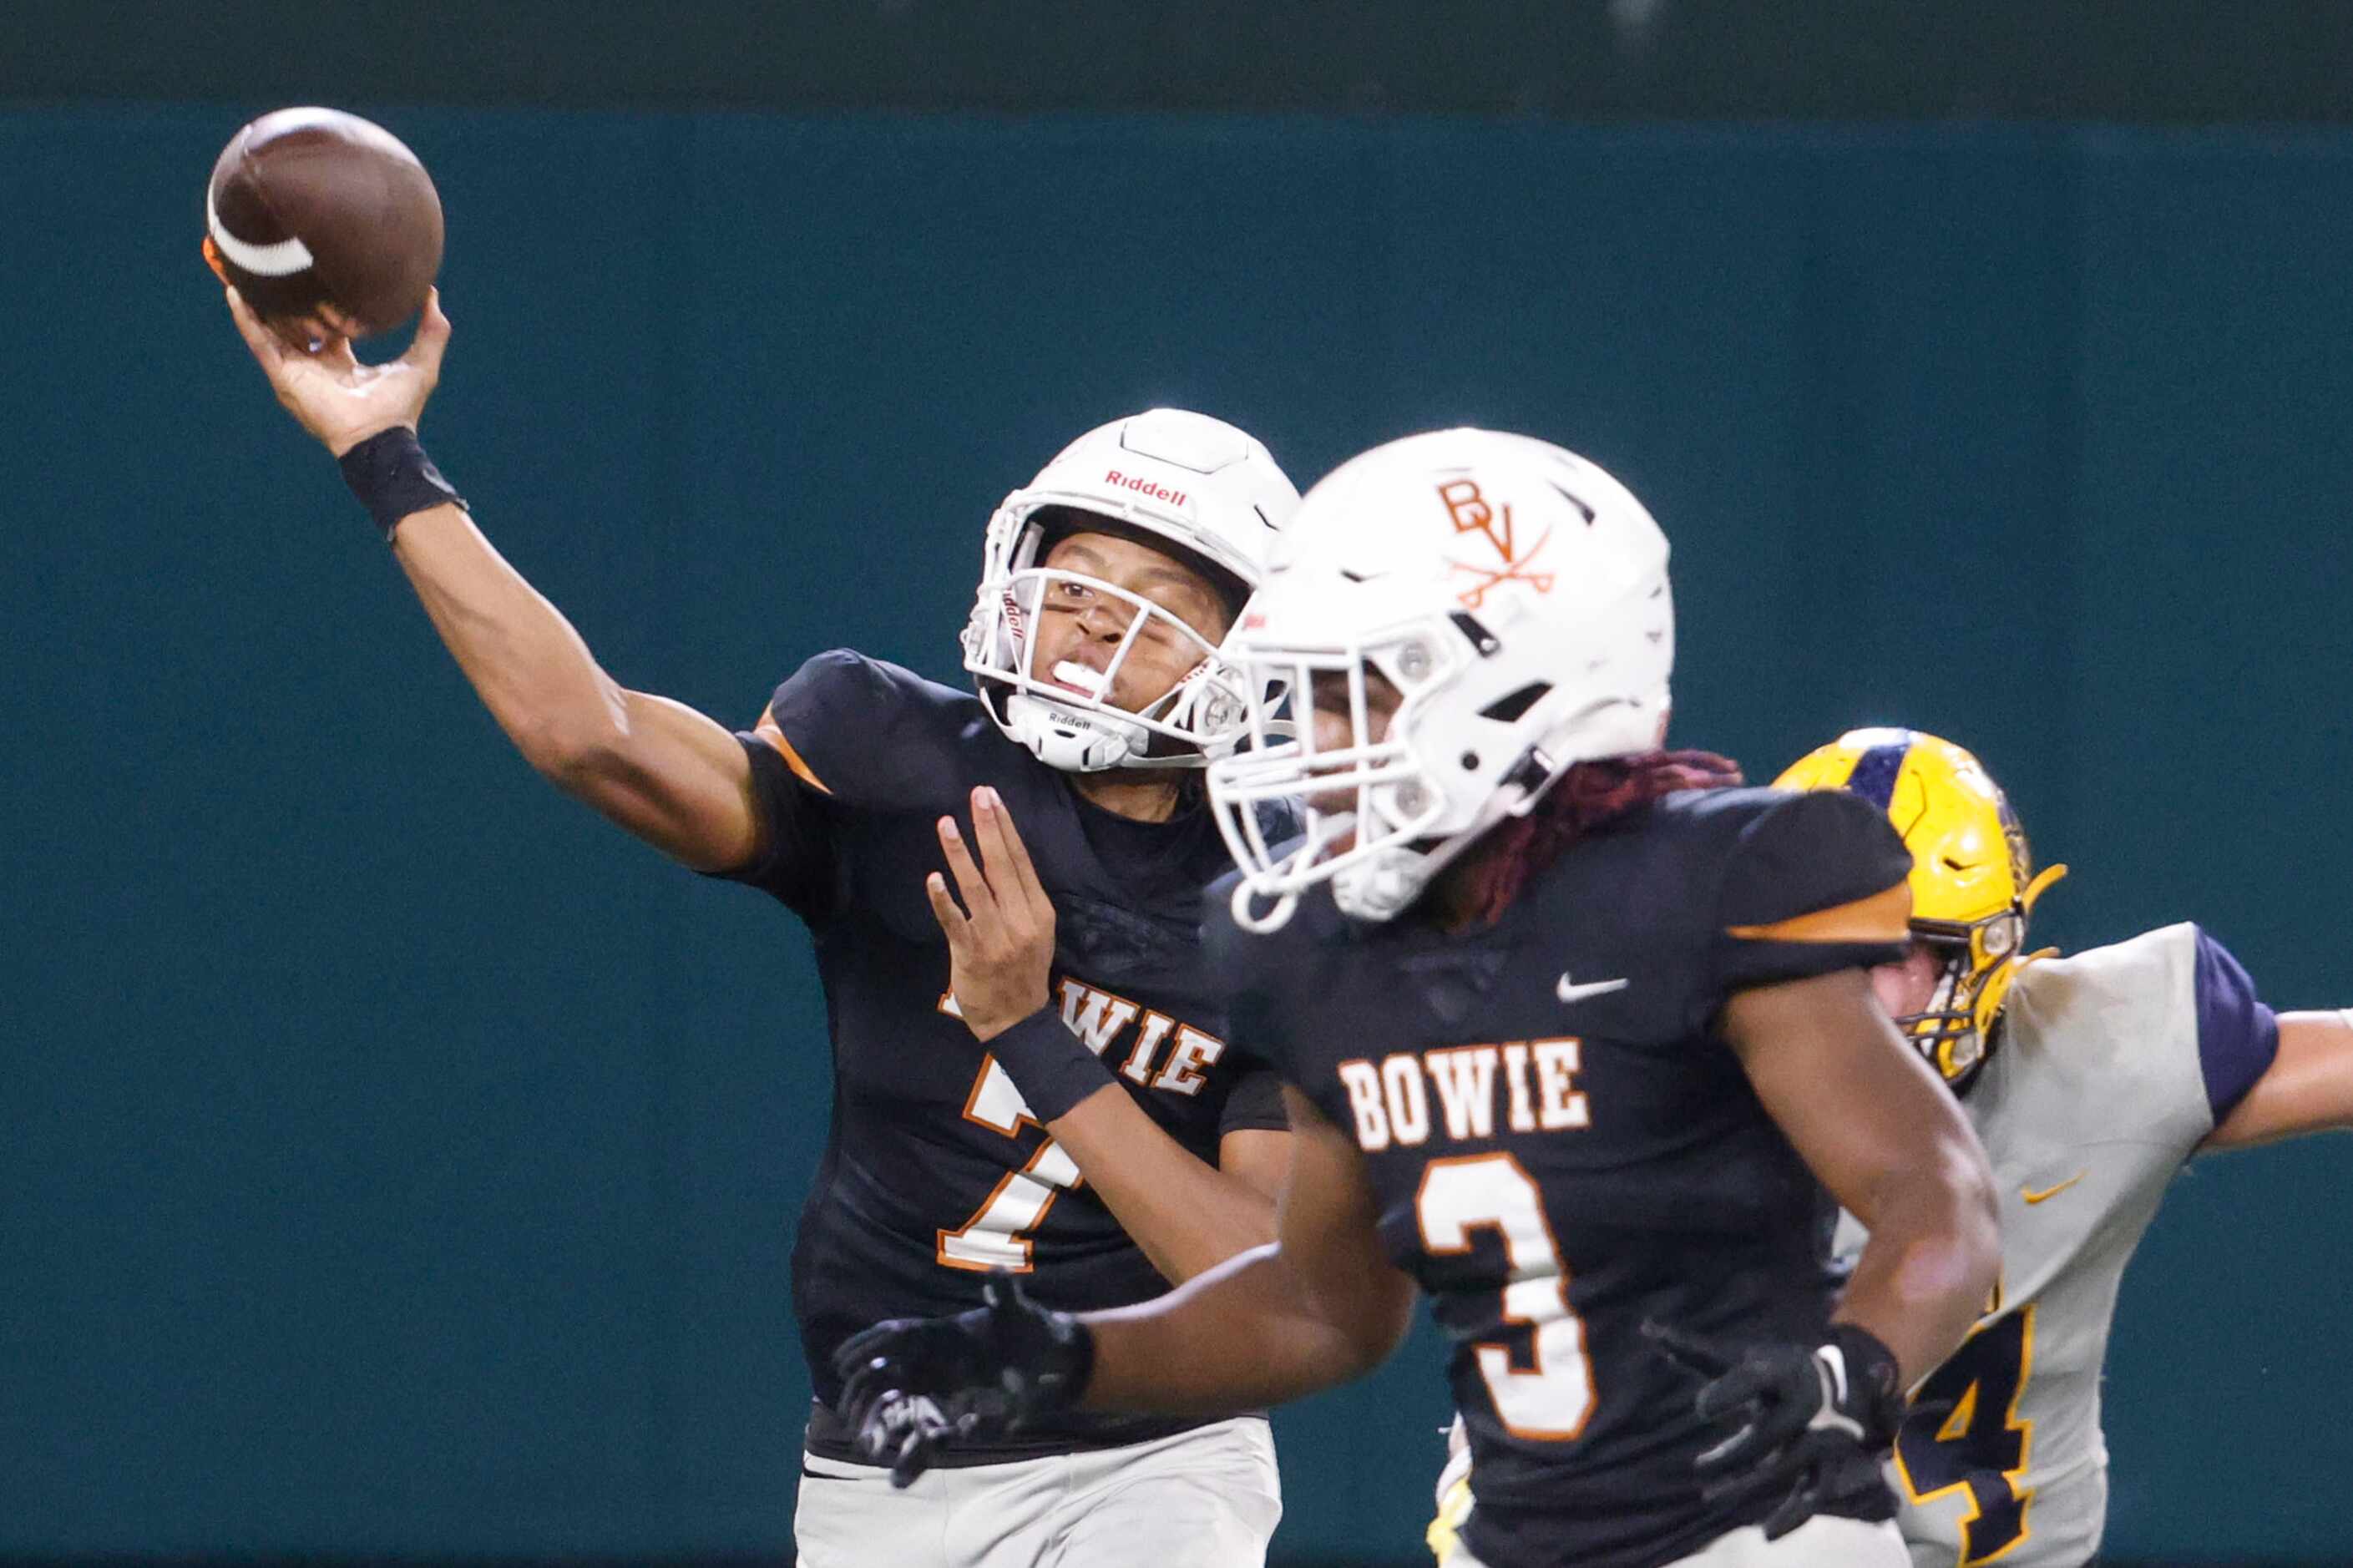 James Bowie QB High School’s Larry Nichols throws the ball during the first half of a...